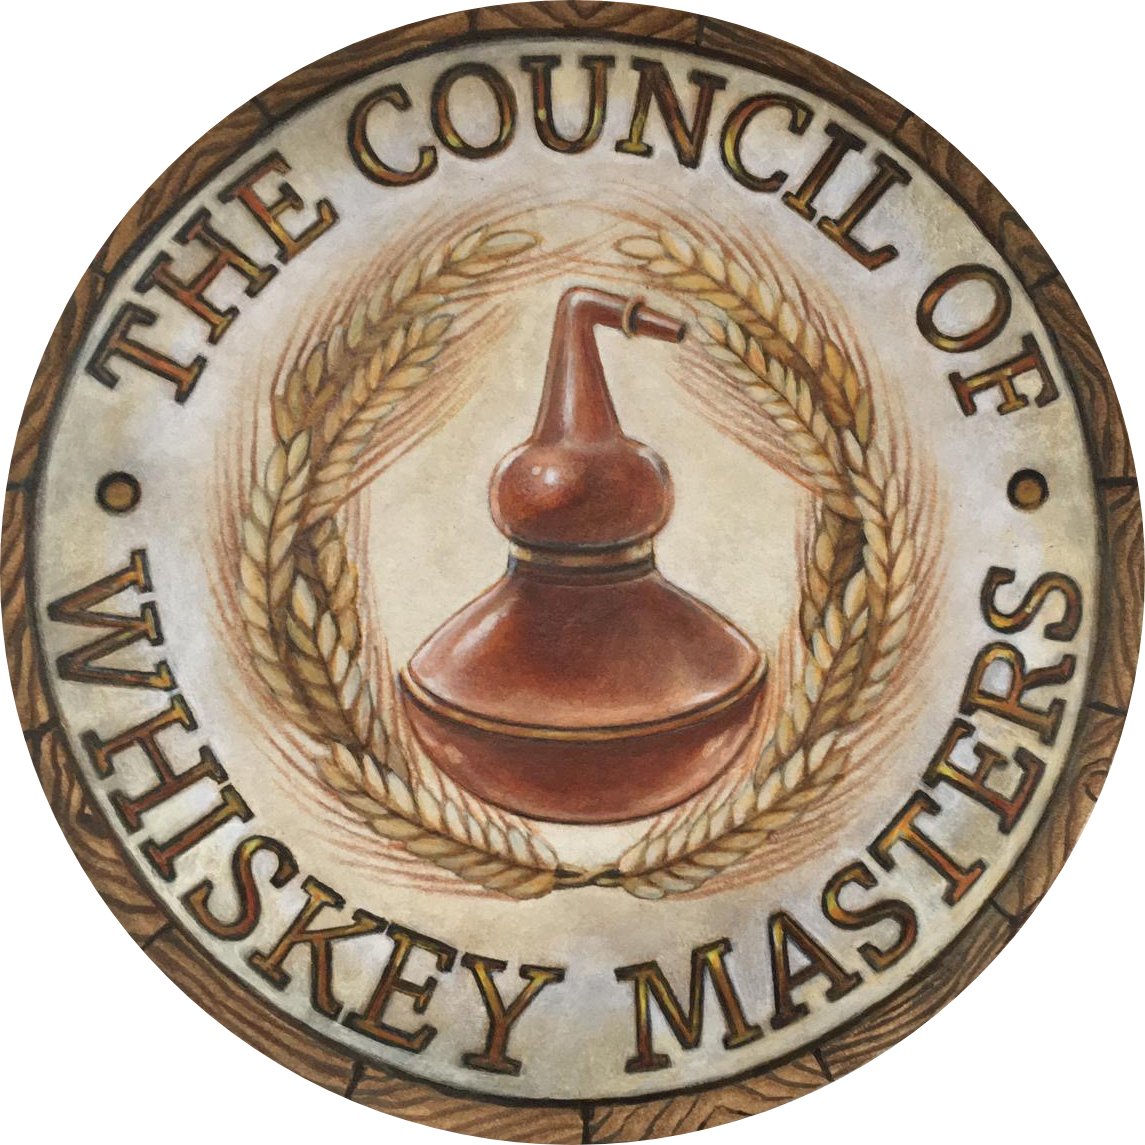 The Official Council of Whiskey Masters